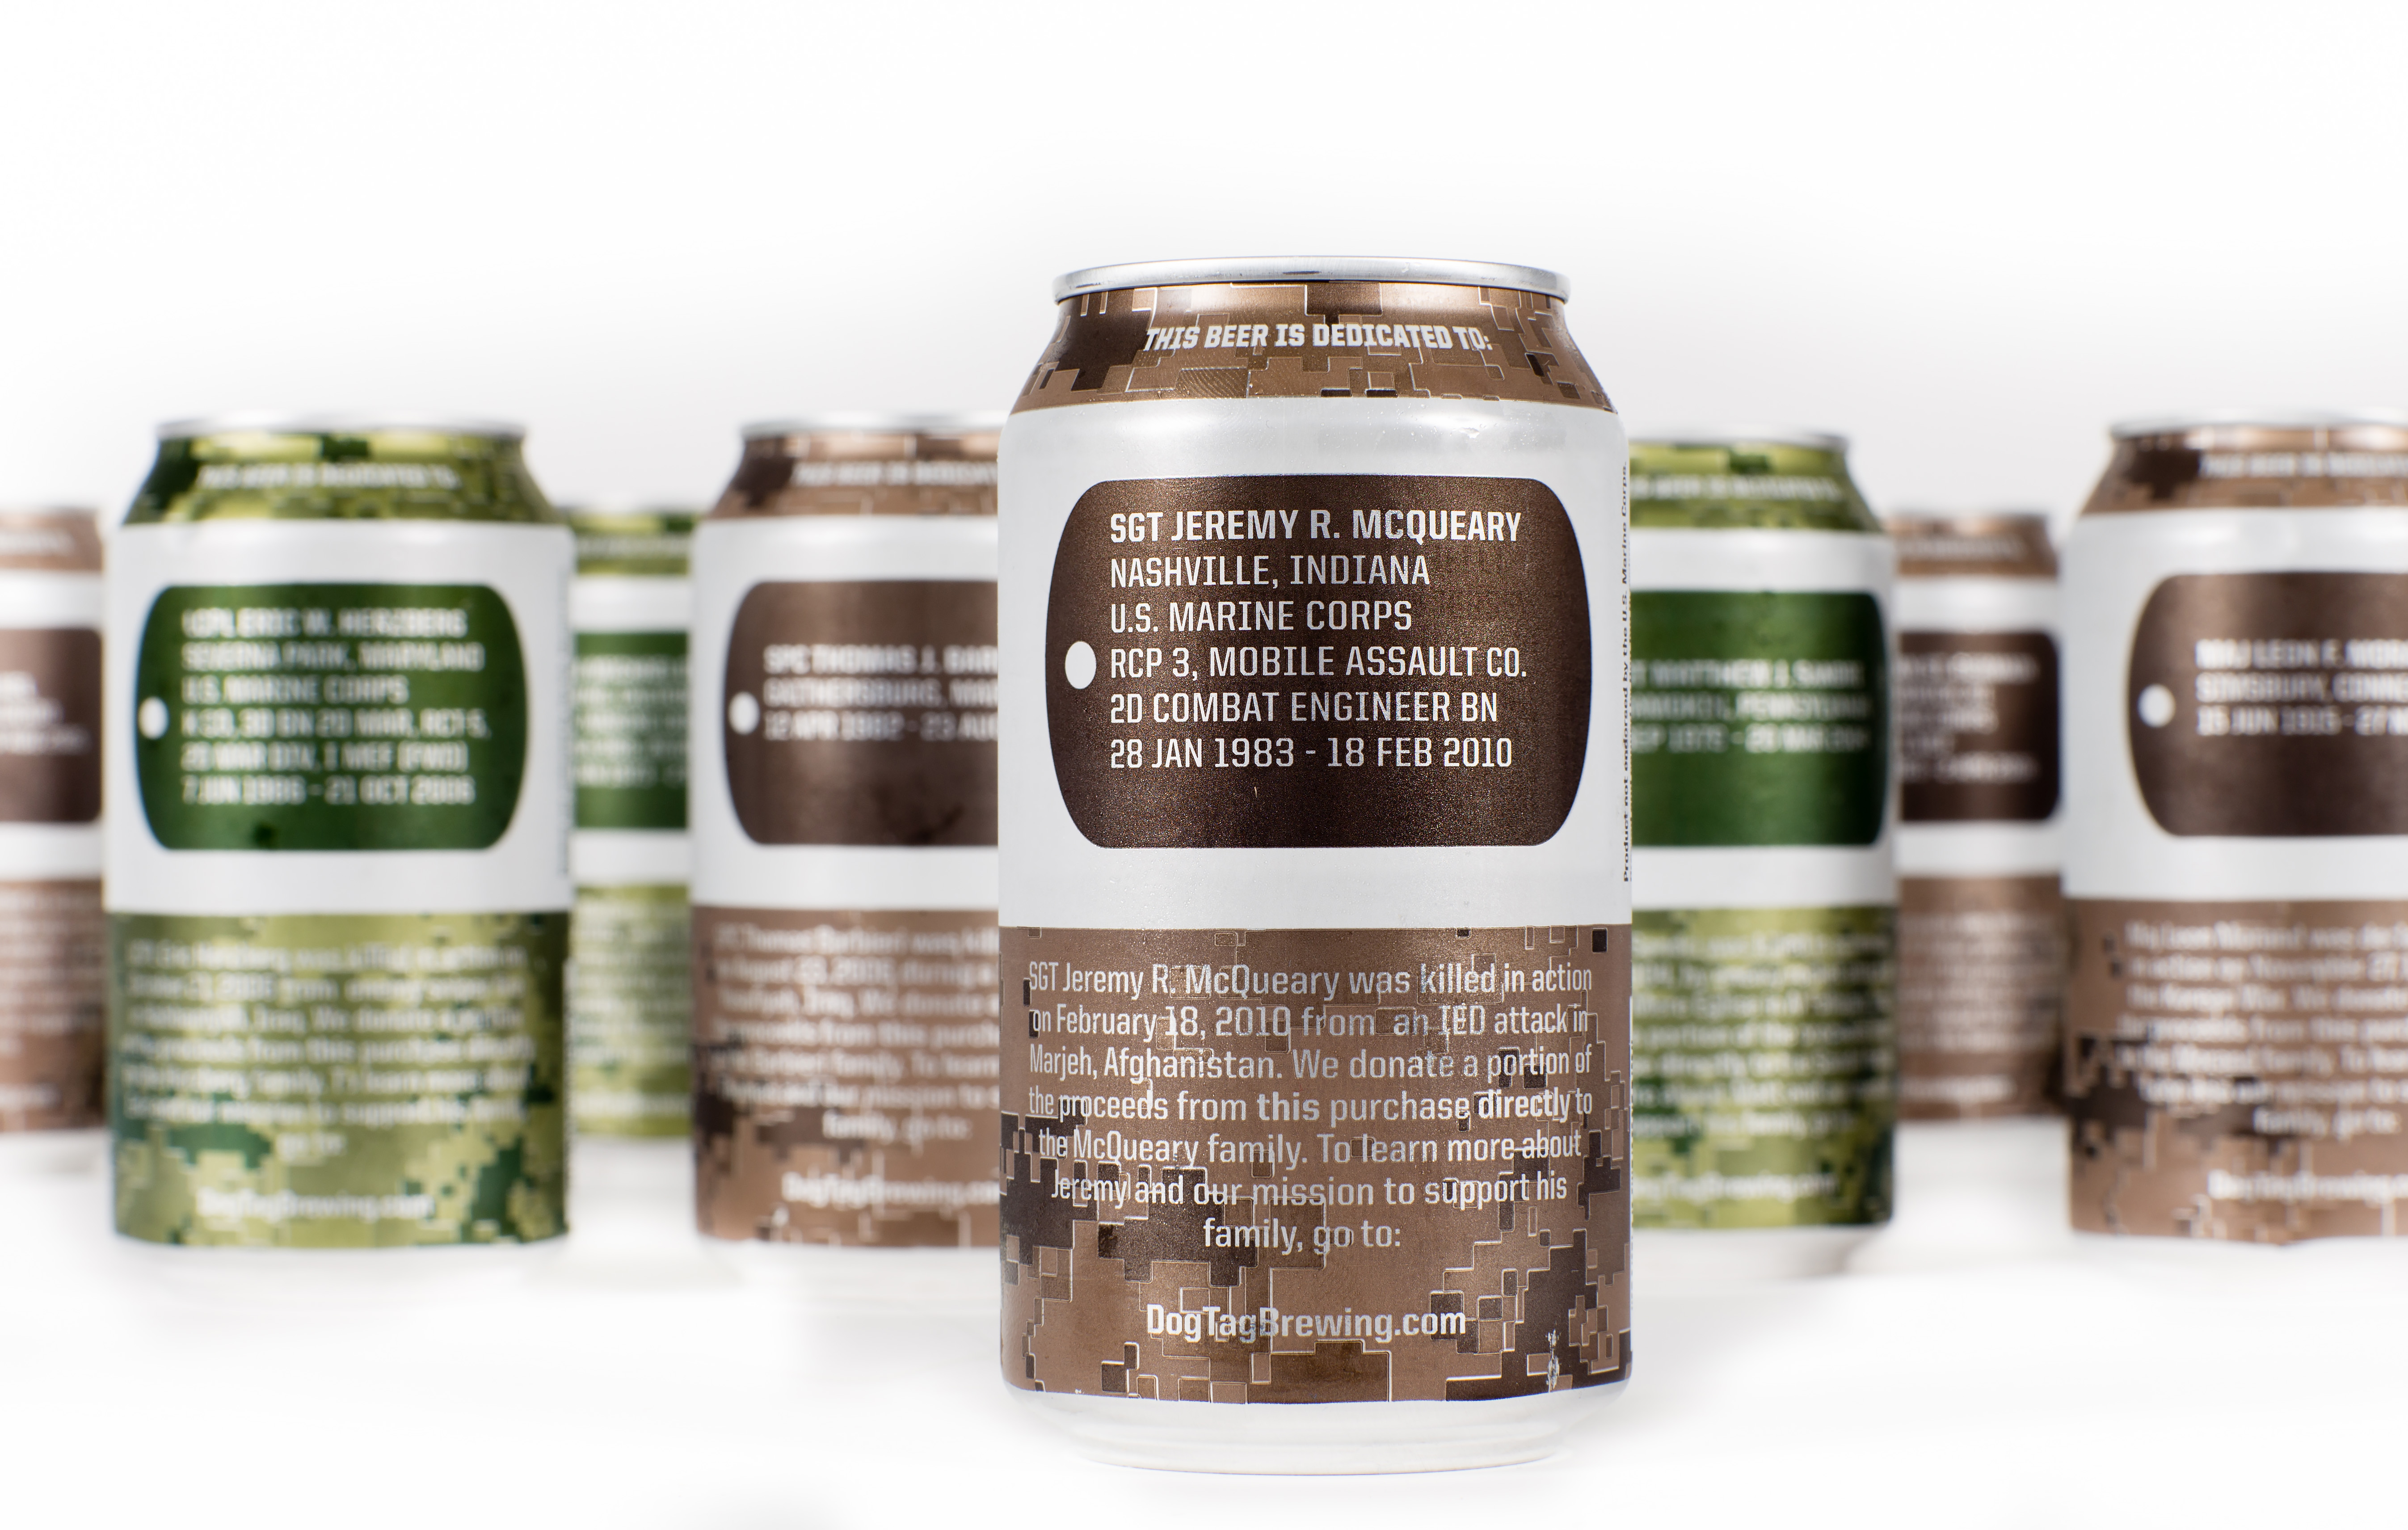 Dog Tag Brewing donates a portion of their proceeds to further honor each warrior featured on their cans.